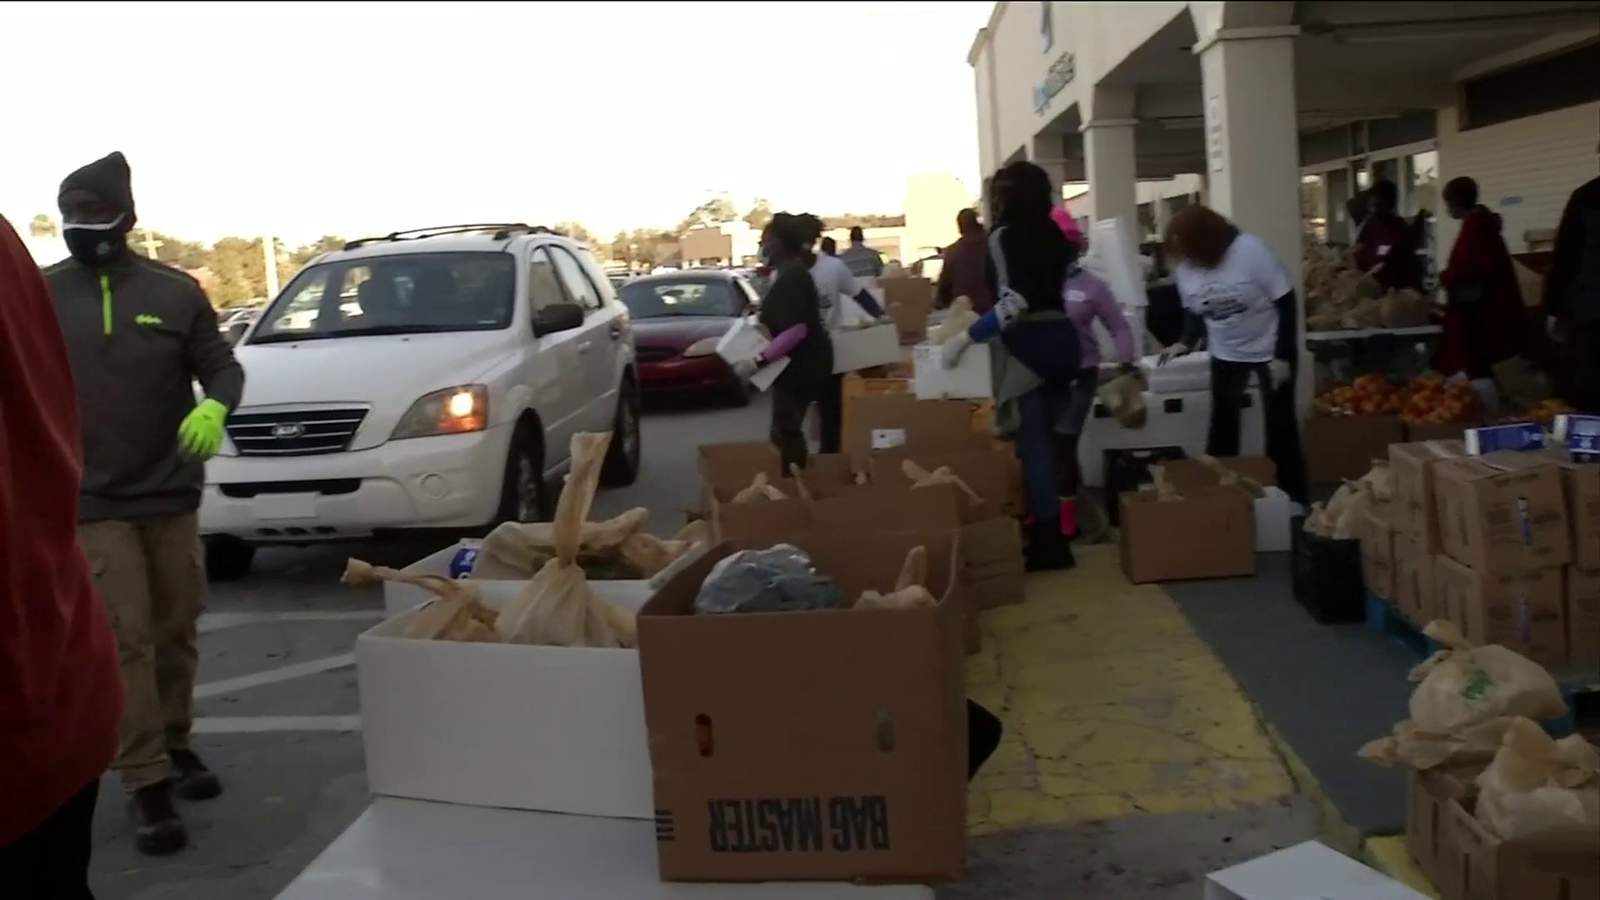 Farm Share distributes 68,000 pounds of food Saturday